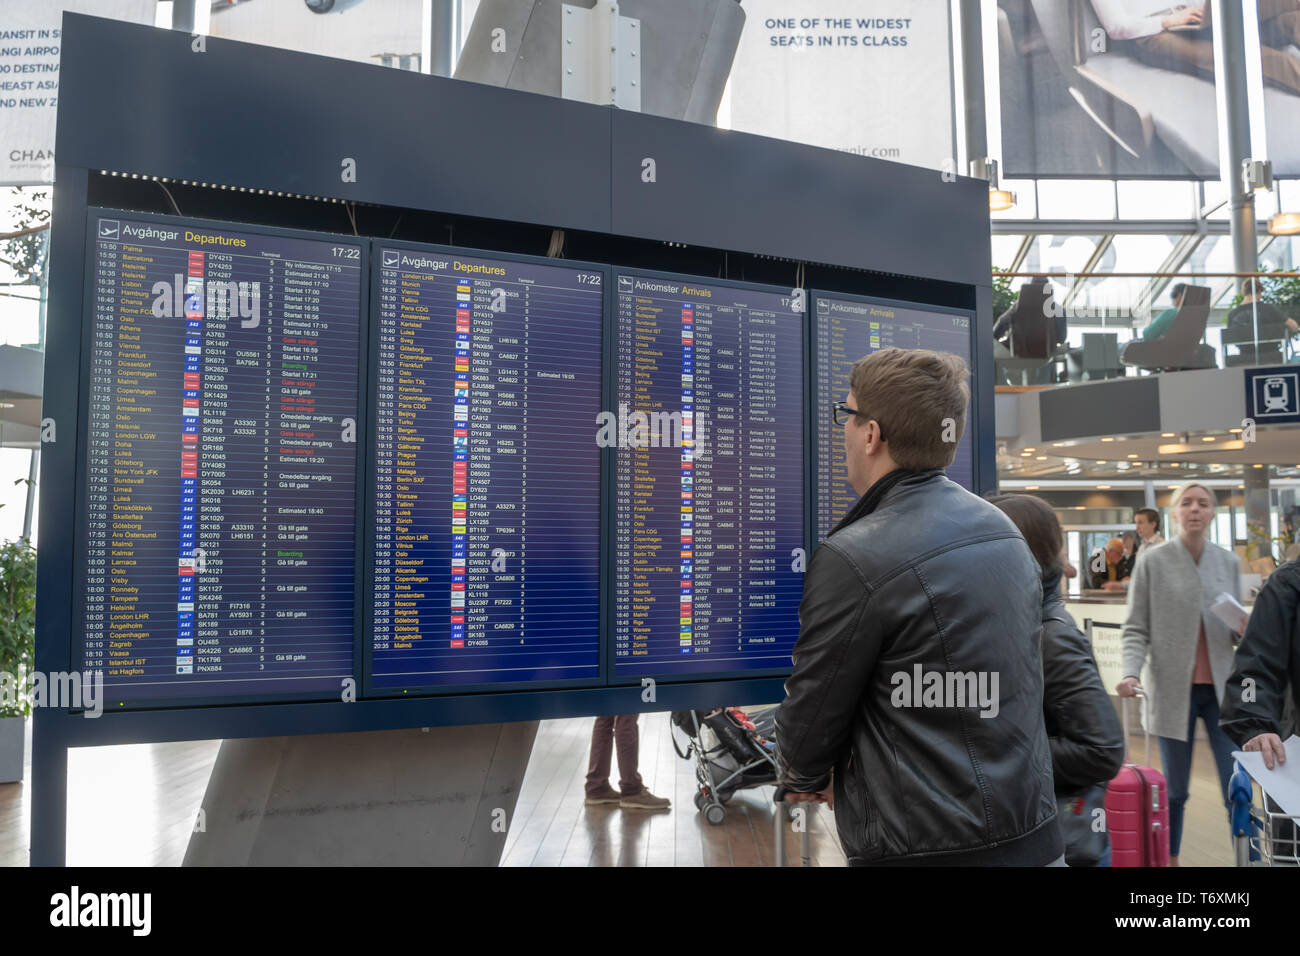 (190503) -- STOCKHOLM, May 3, 2019 (Xinhua) -- Passengers check flights' information at Stockholm Arlanda Airport in Stockholm, Sweden, on May 3, 2019. The Scandinavian Airlines (SAS) pilot strike has ended after an agreement was reached late on Thursday night. All flights in Sweden, Denmark and Norway will resume as soon as possible, Swedish News SVT reported on Friday. (Xinhua/Wei Xuechao) Stock Photo